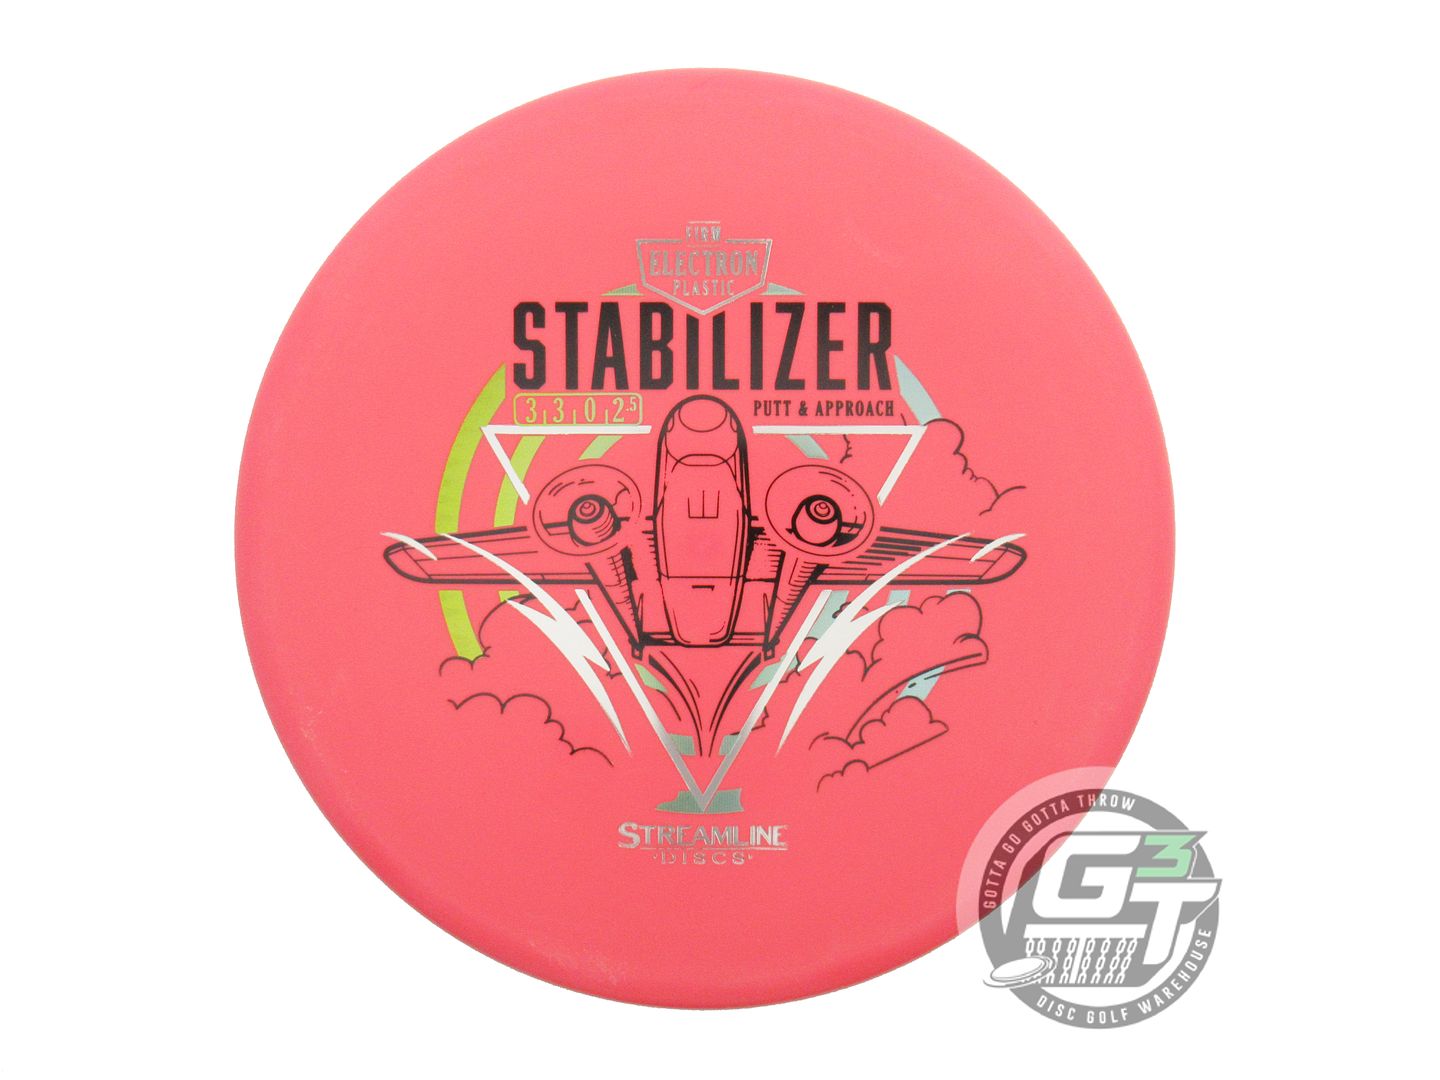 Streamline Electron Firm Stabilizer Putter Golf Disc (Individually Listed)